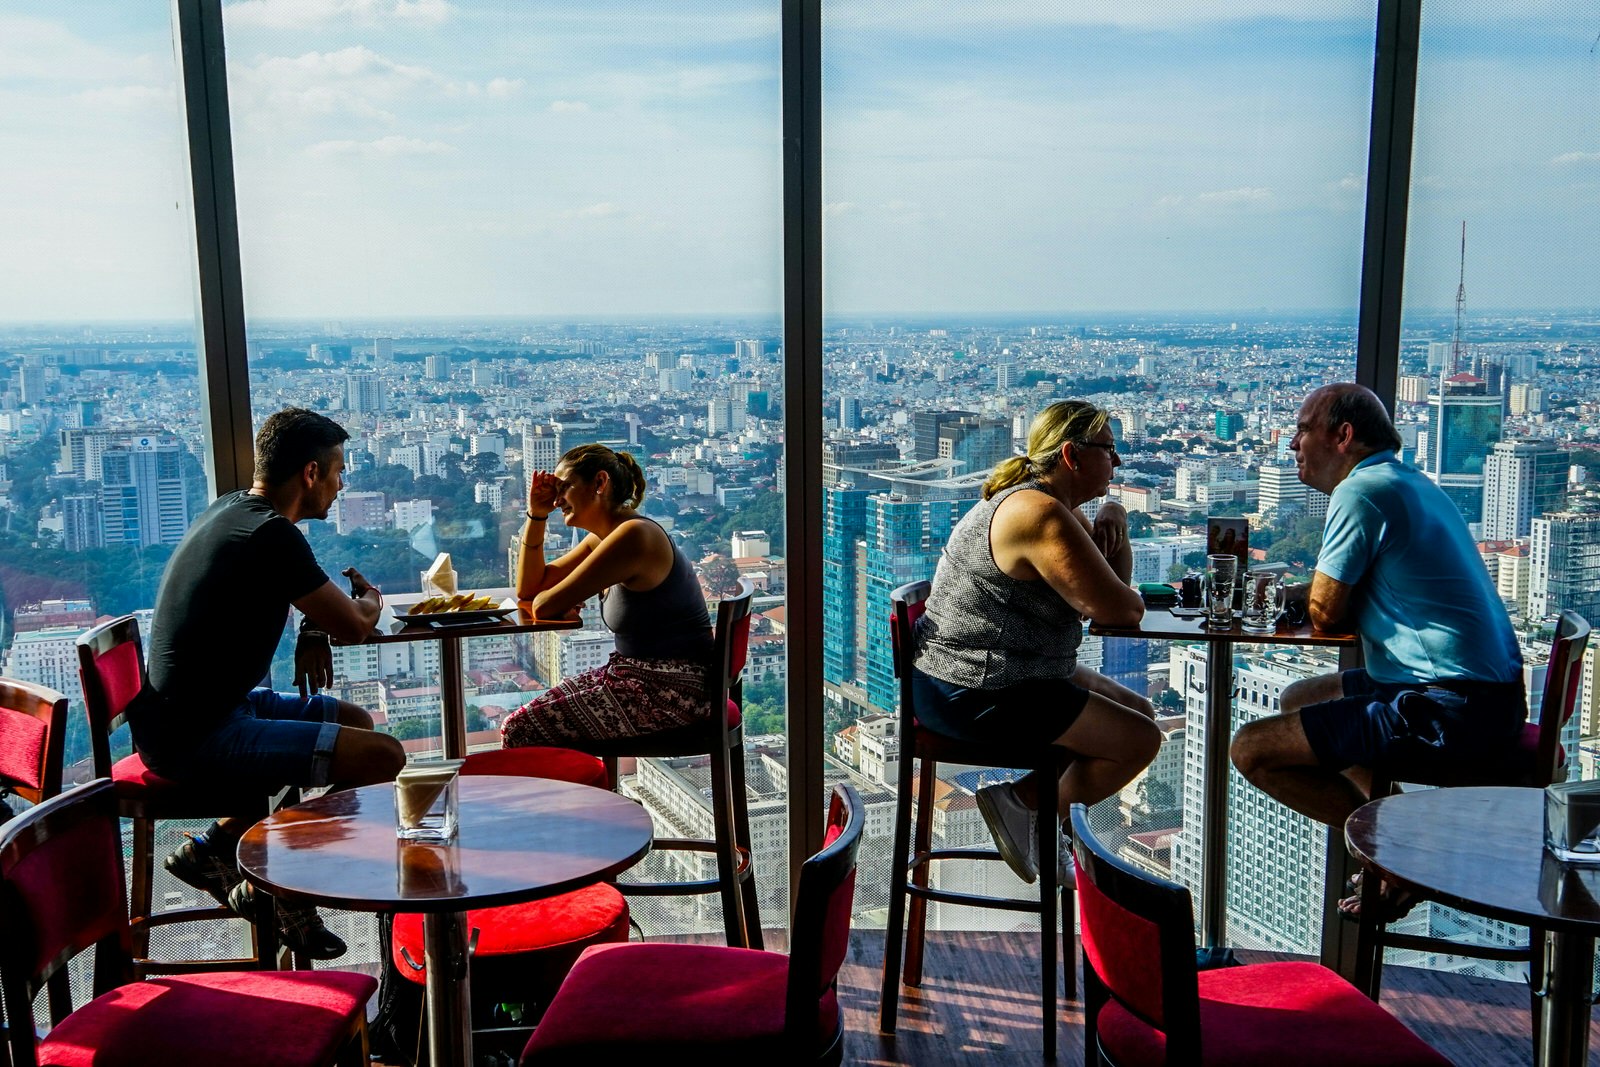 Customers sit by the window at Cafe EON, overlooking expansive views of Ho Chi MInh City below